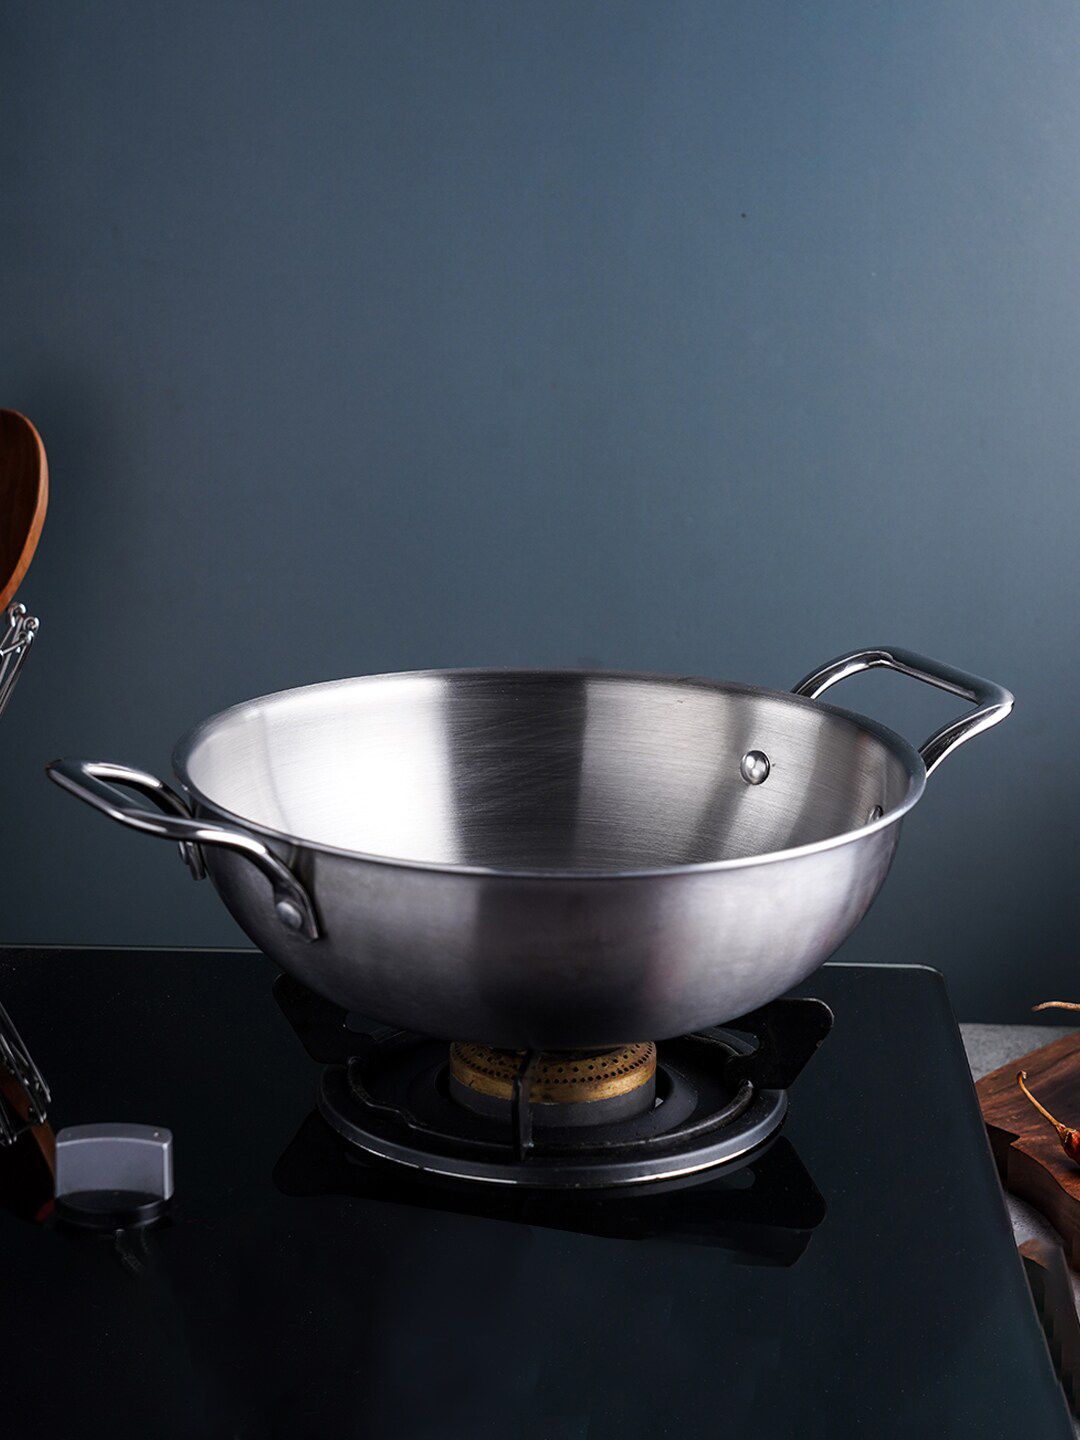 The Indus Valley Silver-Toned Triply Induction Friendly Stainless Steel Kadai Price in India